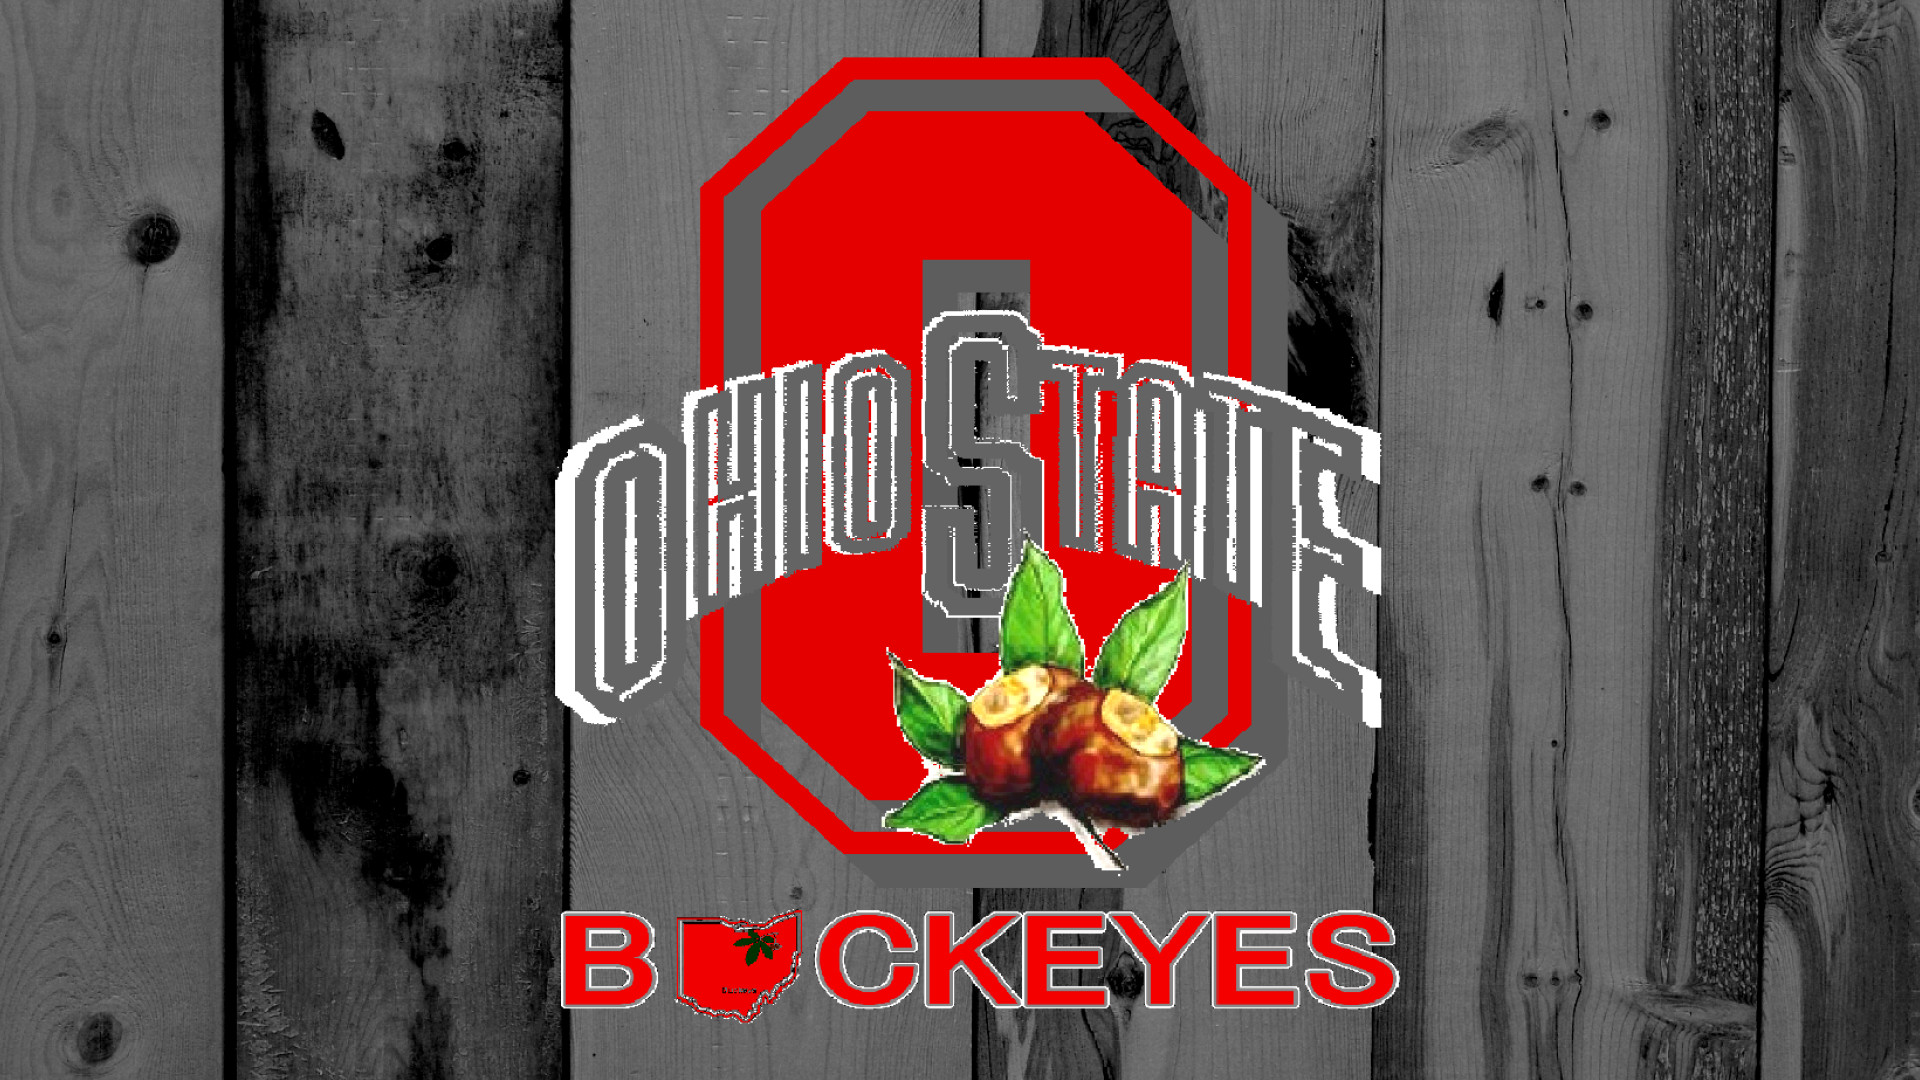 1920x1080 Ohio State Buckeyes images OHIO STATE BUCKEYES RED BLOCK O ON GRAY BARN HD  wallpaper and background photos